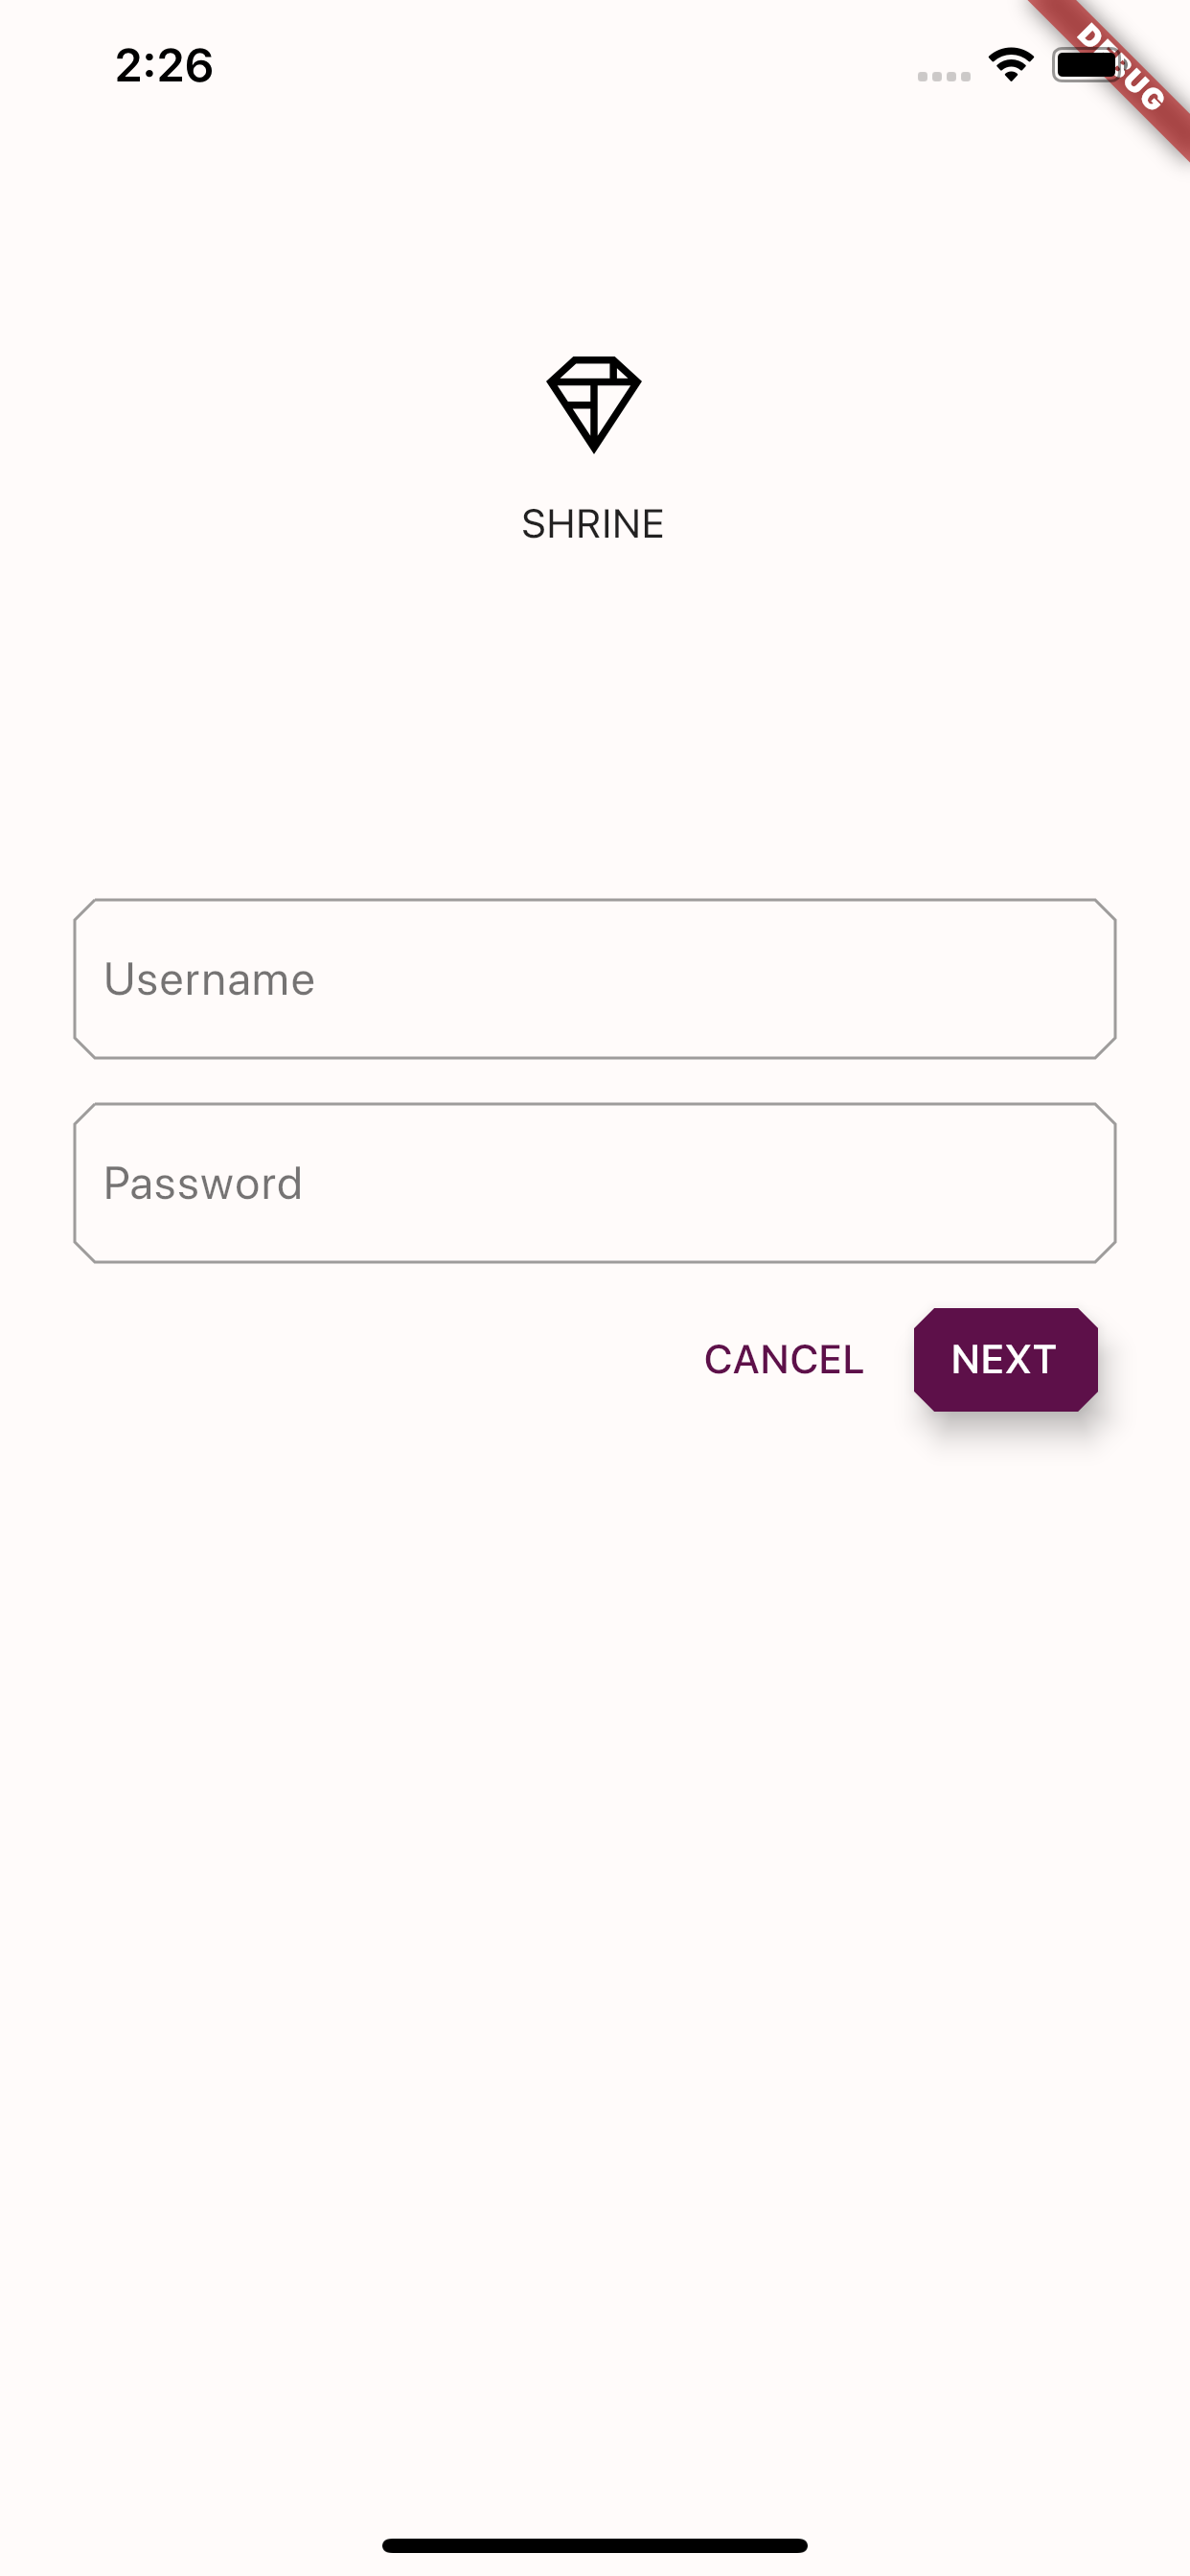 Shrine login page with a purple and white theme